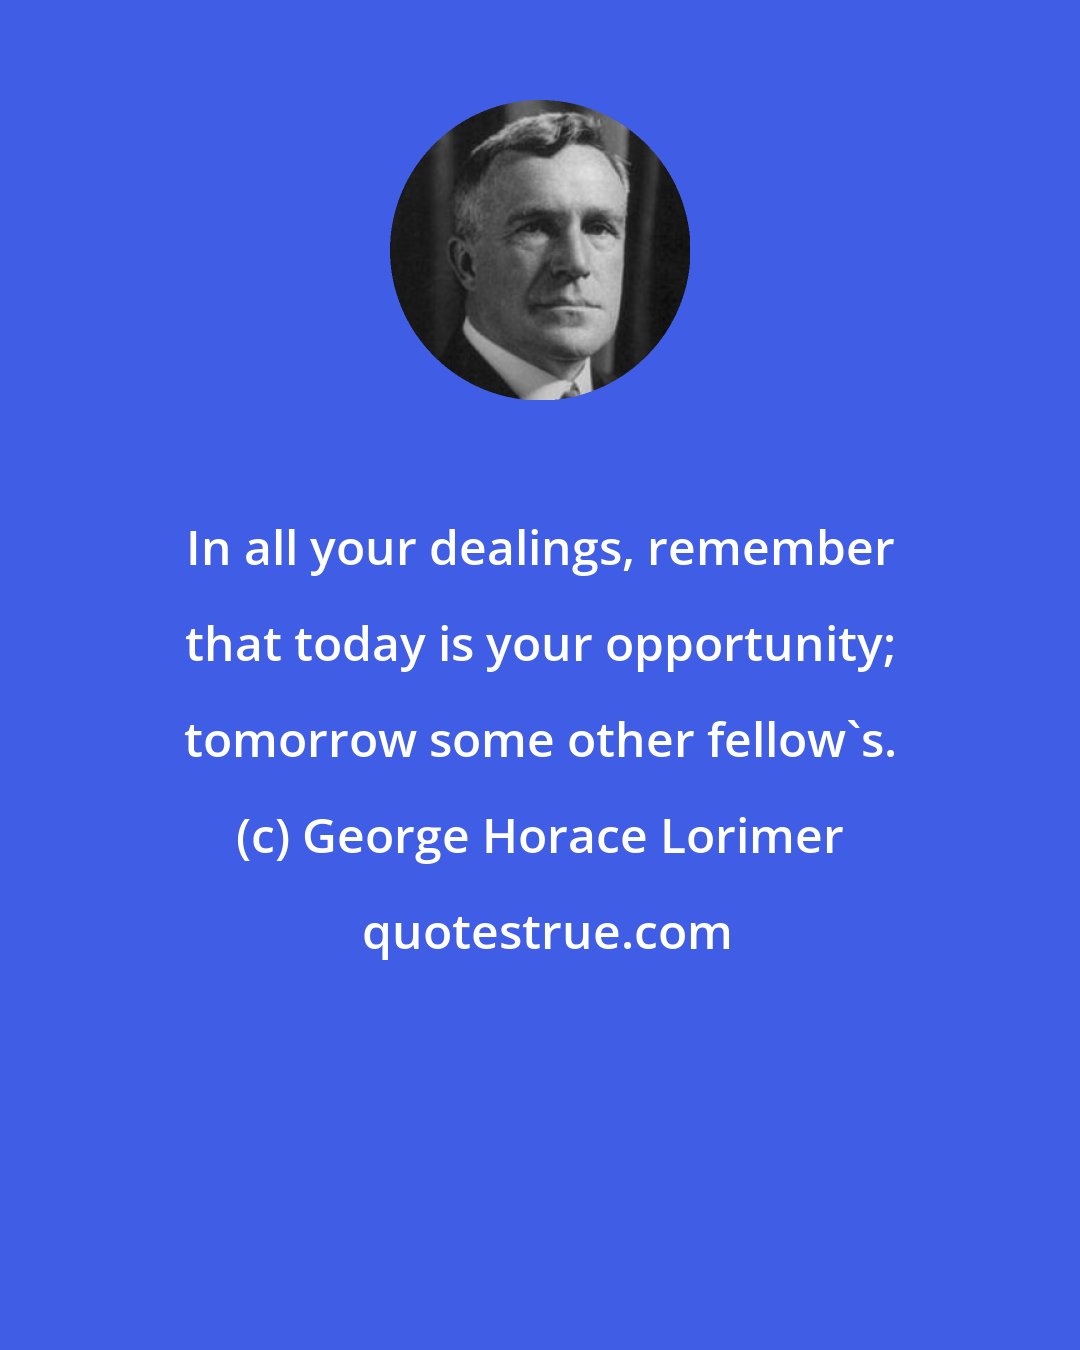 George Horace Lorimer: In all your dealings, remember that today is your opportunity; tomorrow some other fellow's.